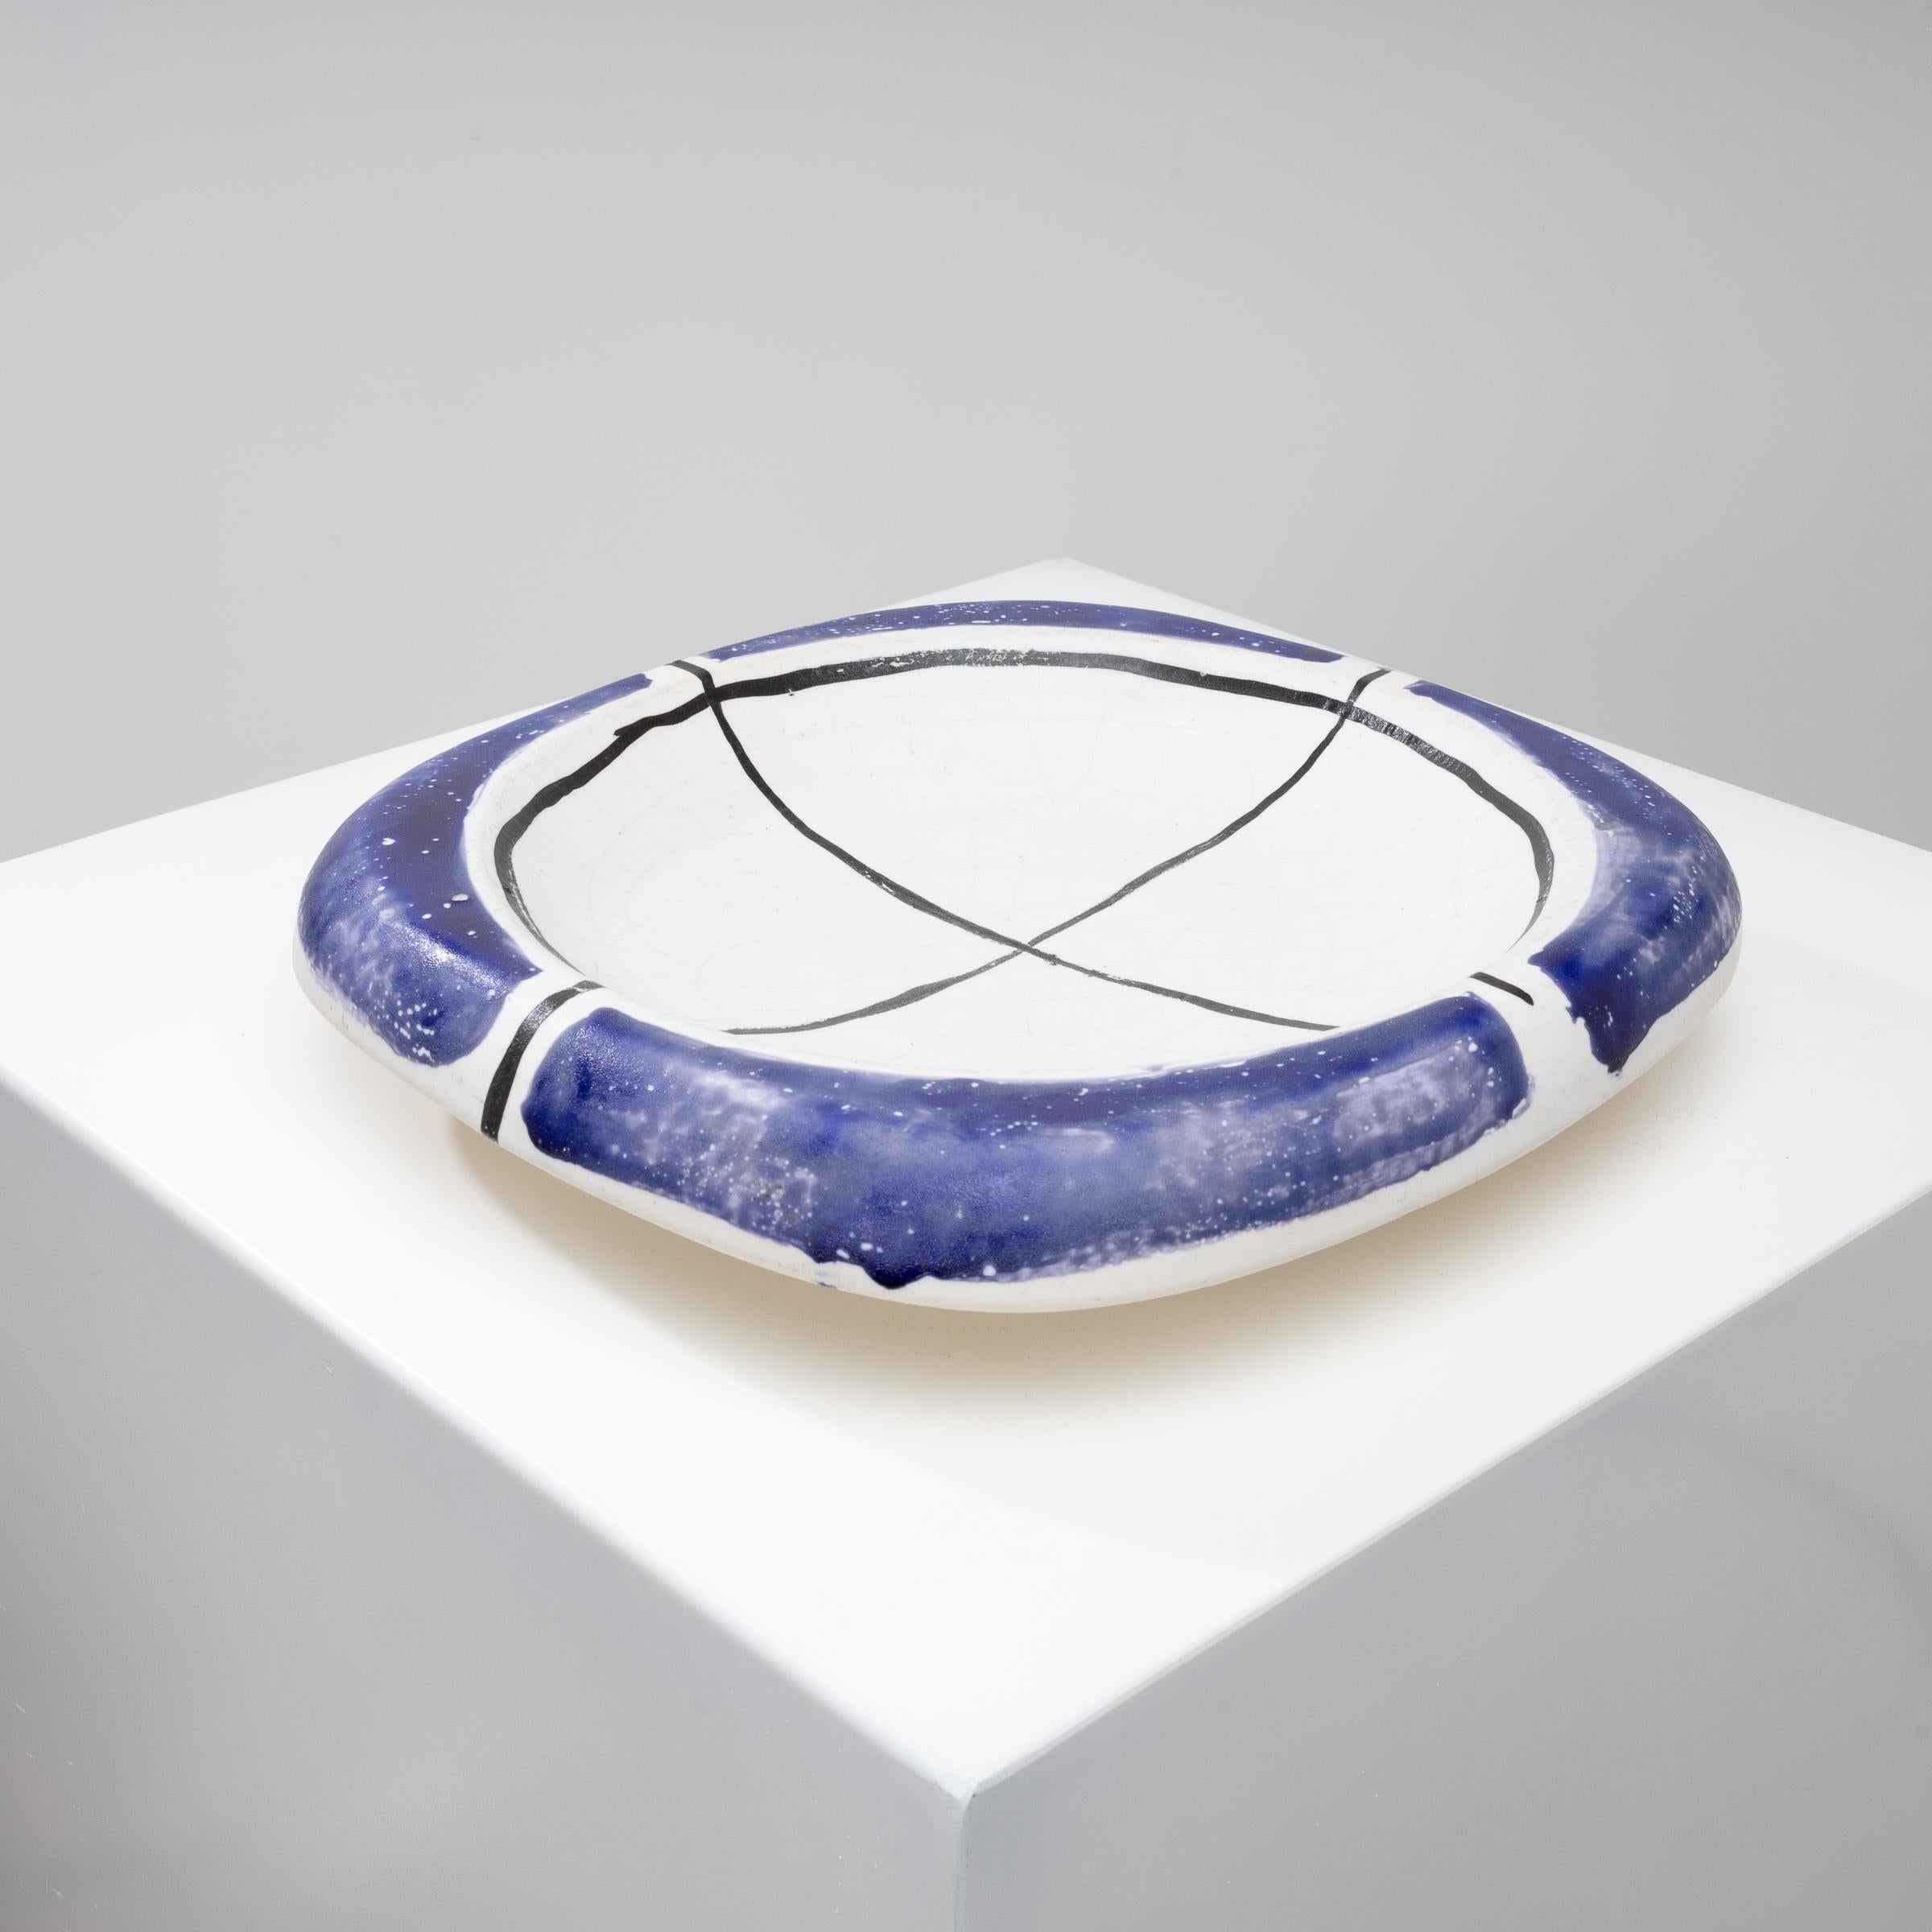 Mid-Century Modern Glazed Ceramic Dish by Georges Jouve, France